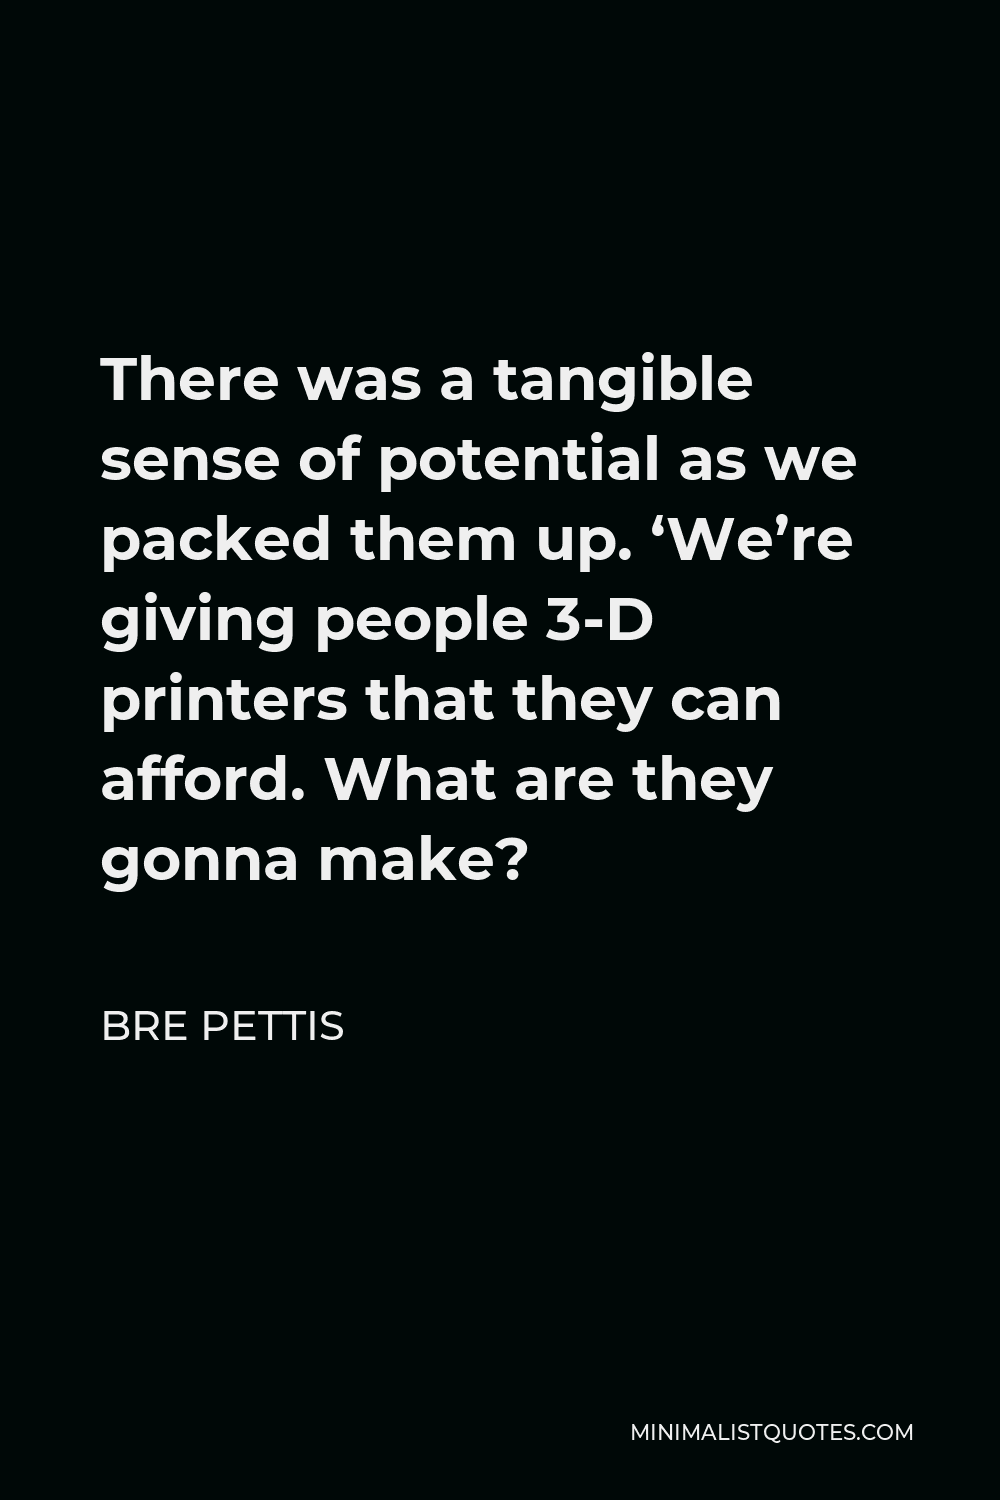 Bre Pettis Quote - There was a tangible sense of potential as we packed them up. ‘We’re giving people 3-D printers that they can afford. What are they gonna make?